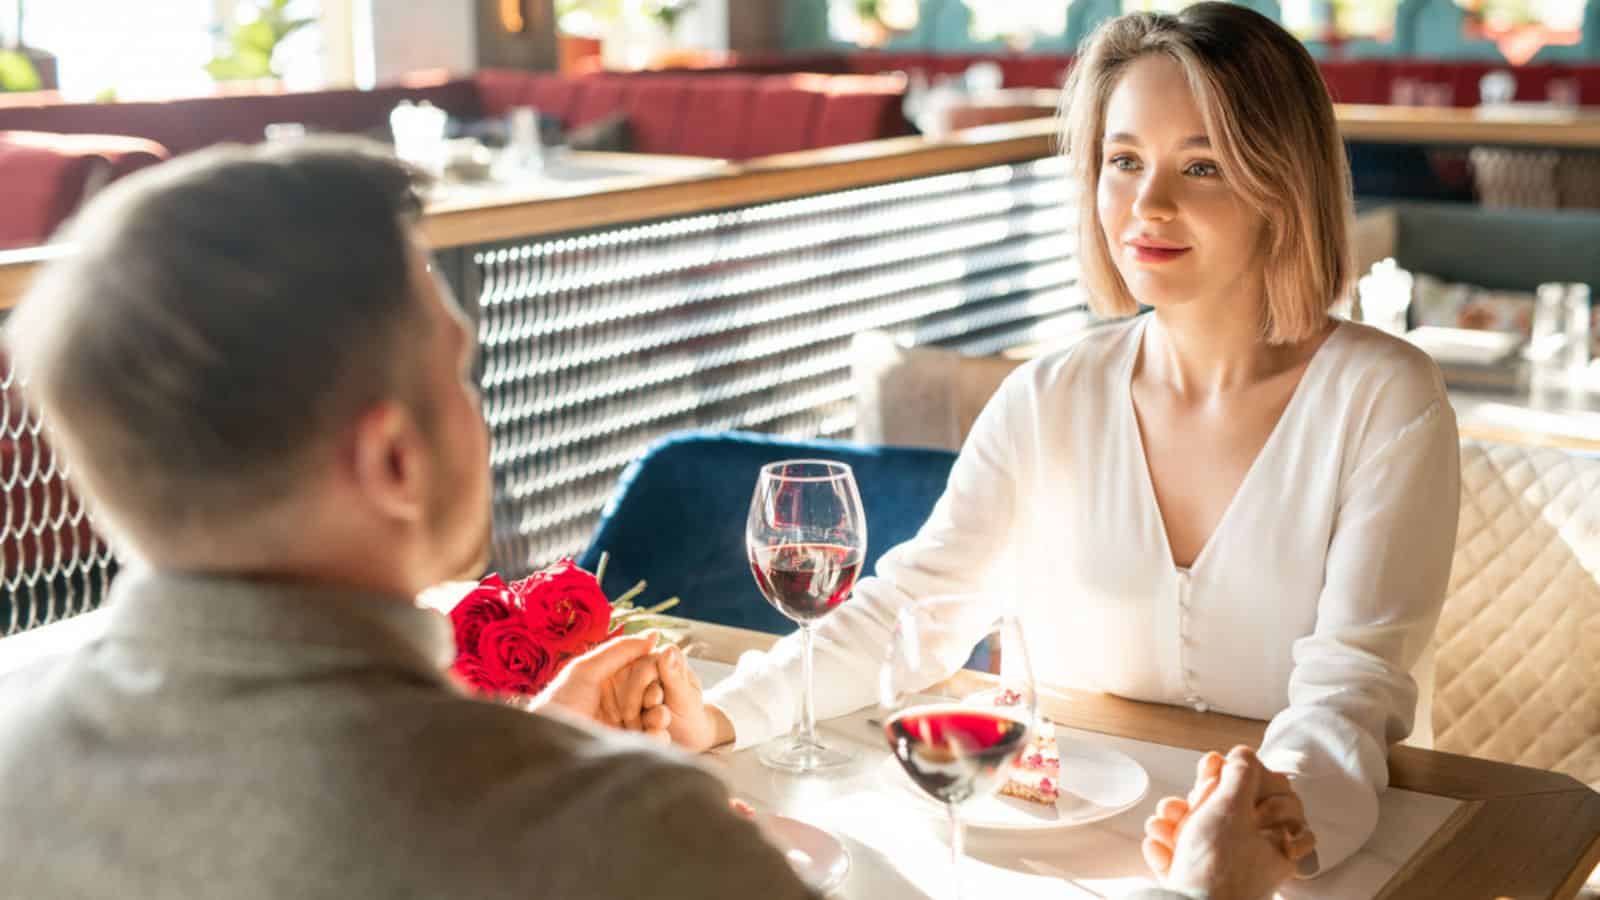 Lovey-dovey man and woman sitting in front of each other at restaurant table gently holding hands and looking at each other